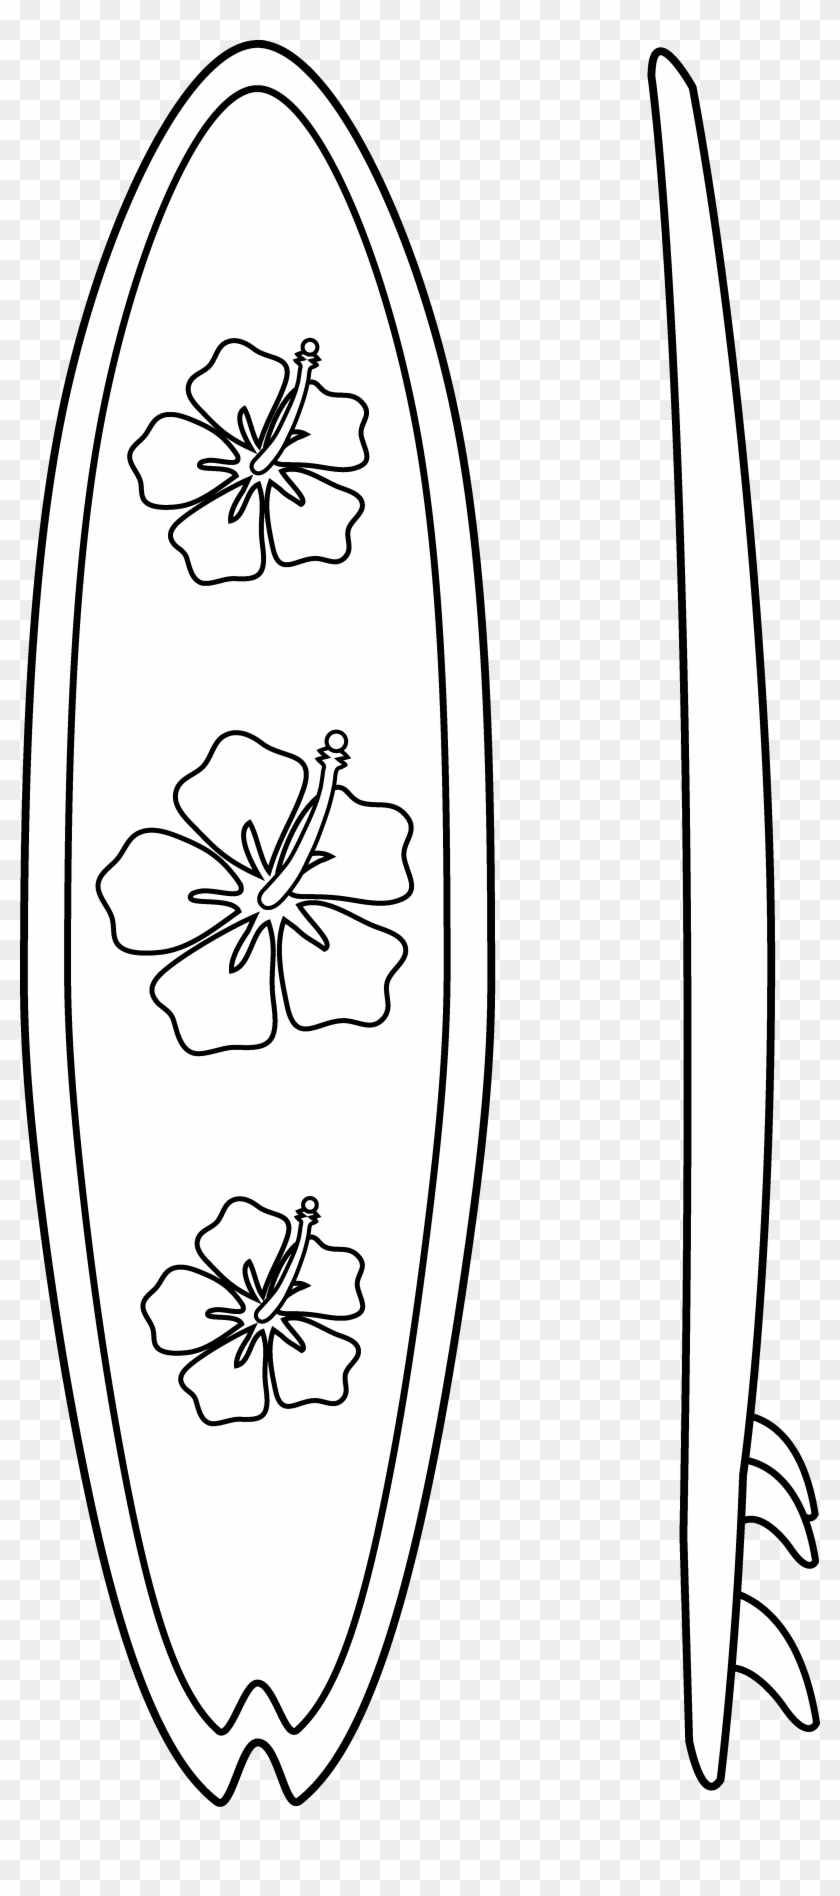 surfboards-outline-surfboard-coloring-pages-hd-png-download-3372x7452-491351-pngfind